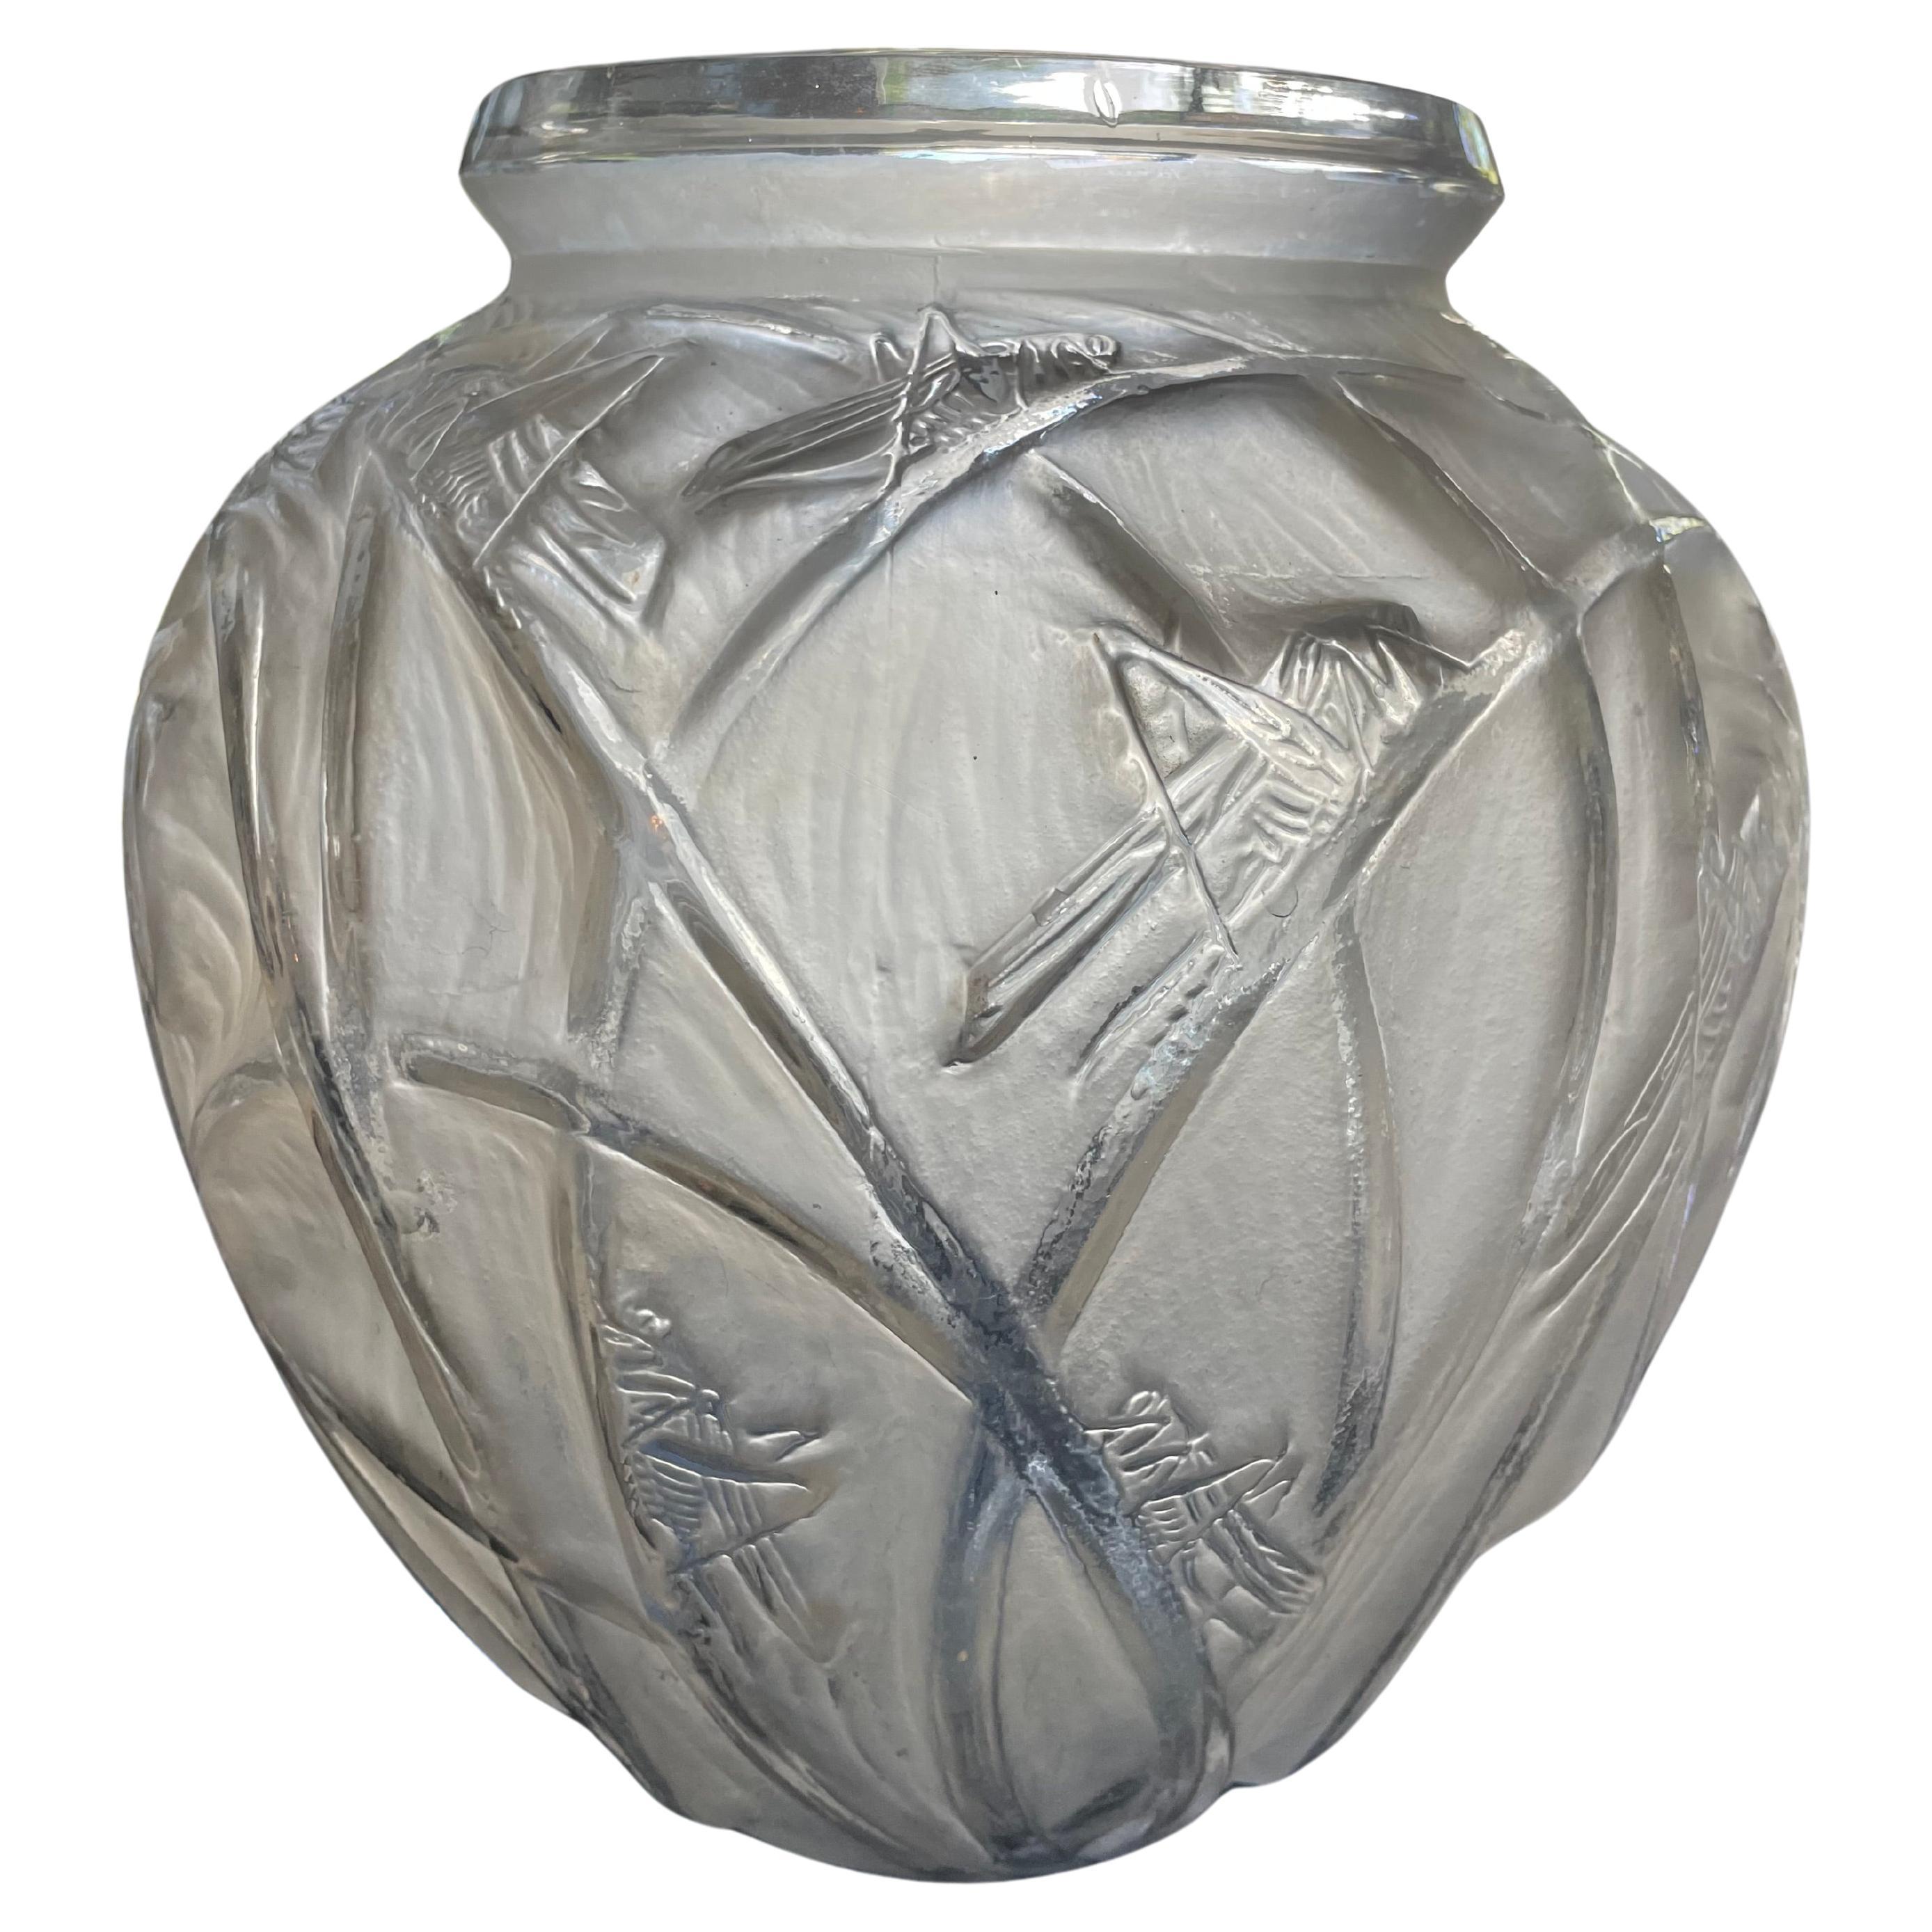 "Sauterelles" Vase by Rene Lalique from the Linda Ronstadt Collection